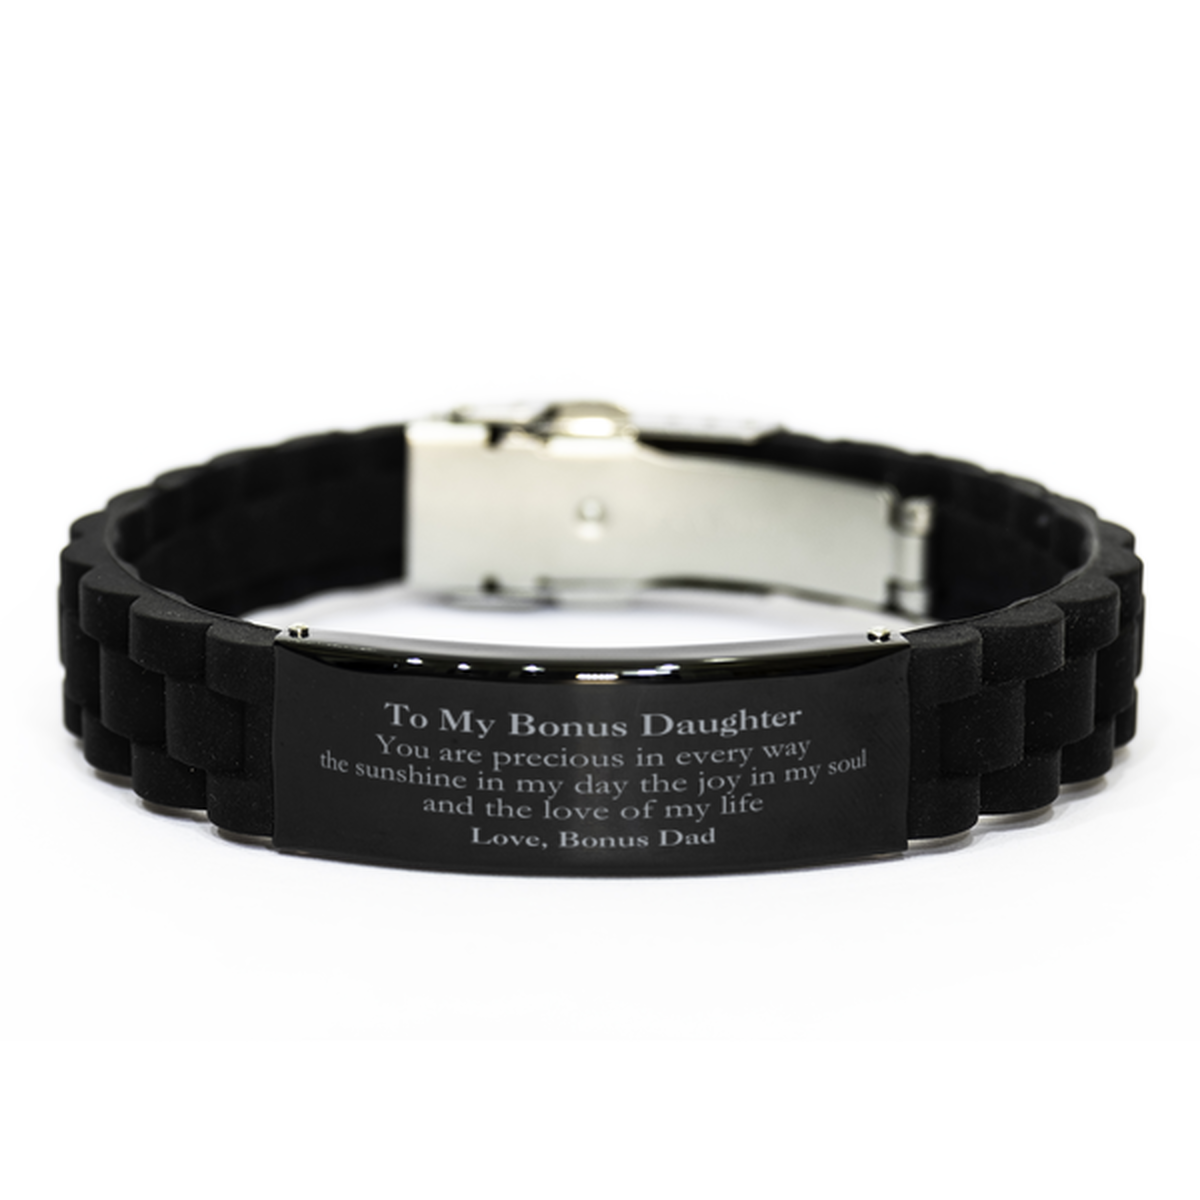 Graduation Gifts for Bonus Daughter Black Glidelock Clasp Bracelet Present from Bonus Dad, Christmas Bonus Daughter Birthday Gifts Bonus Daughter You are precious in every way the sunshine in my day. Love, Bonus Dad